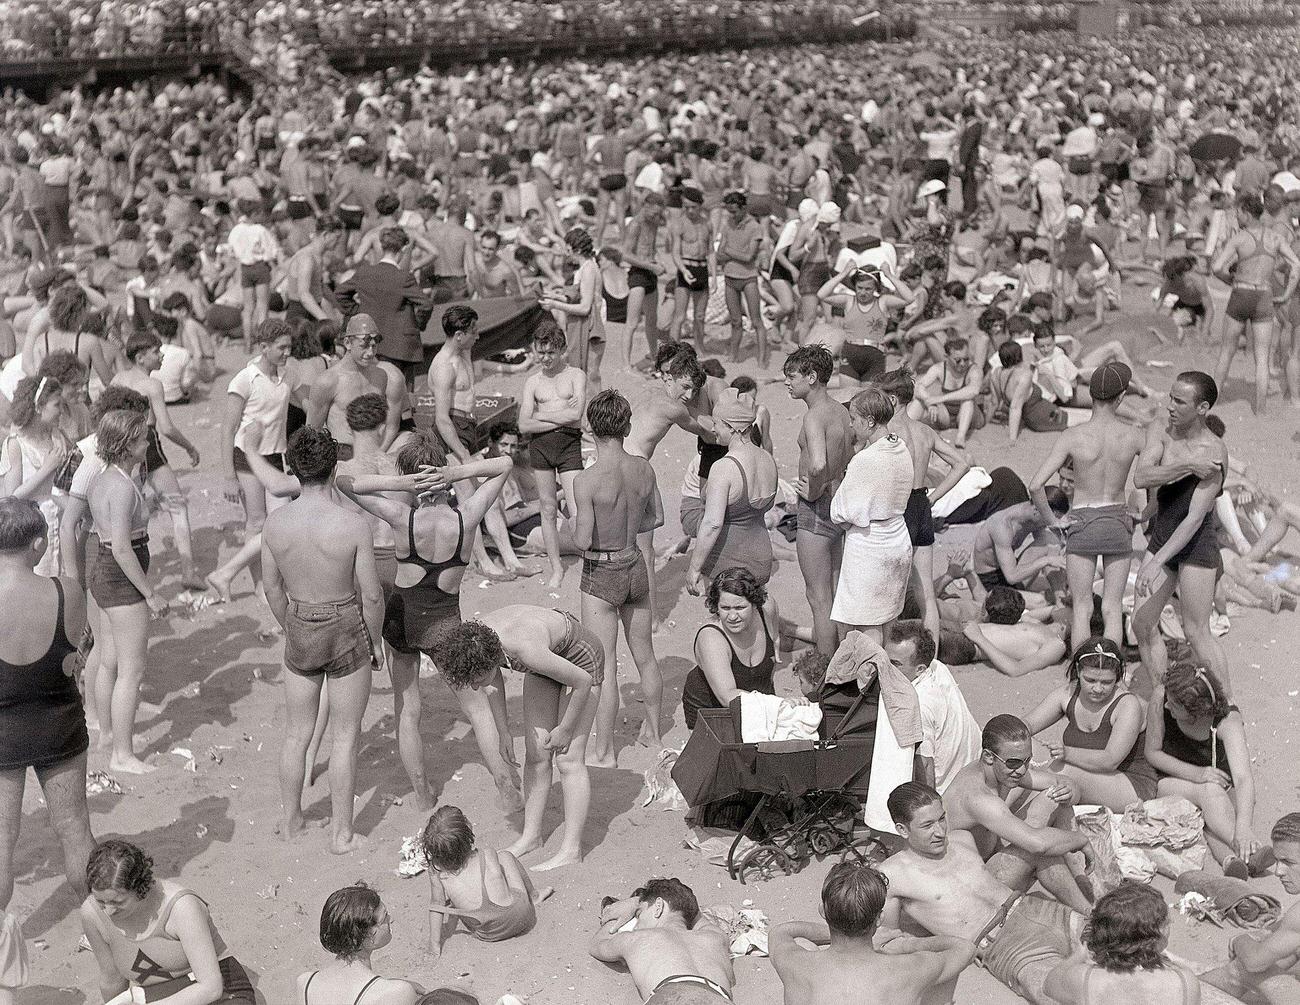 Coney Island Beach Scene Filled With People, 1935